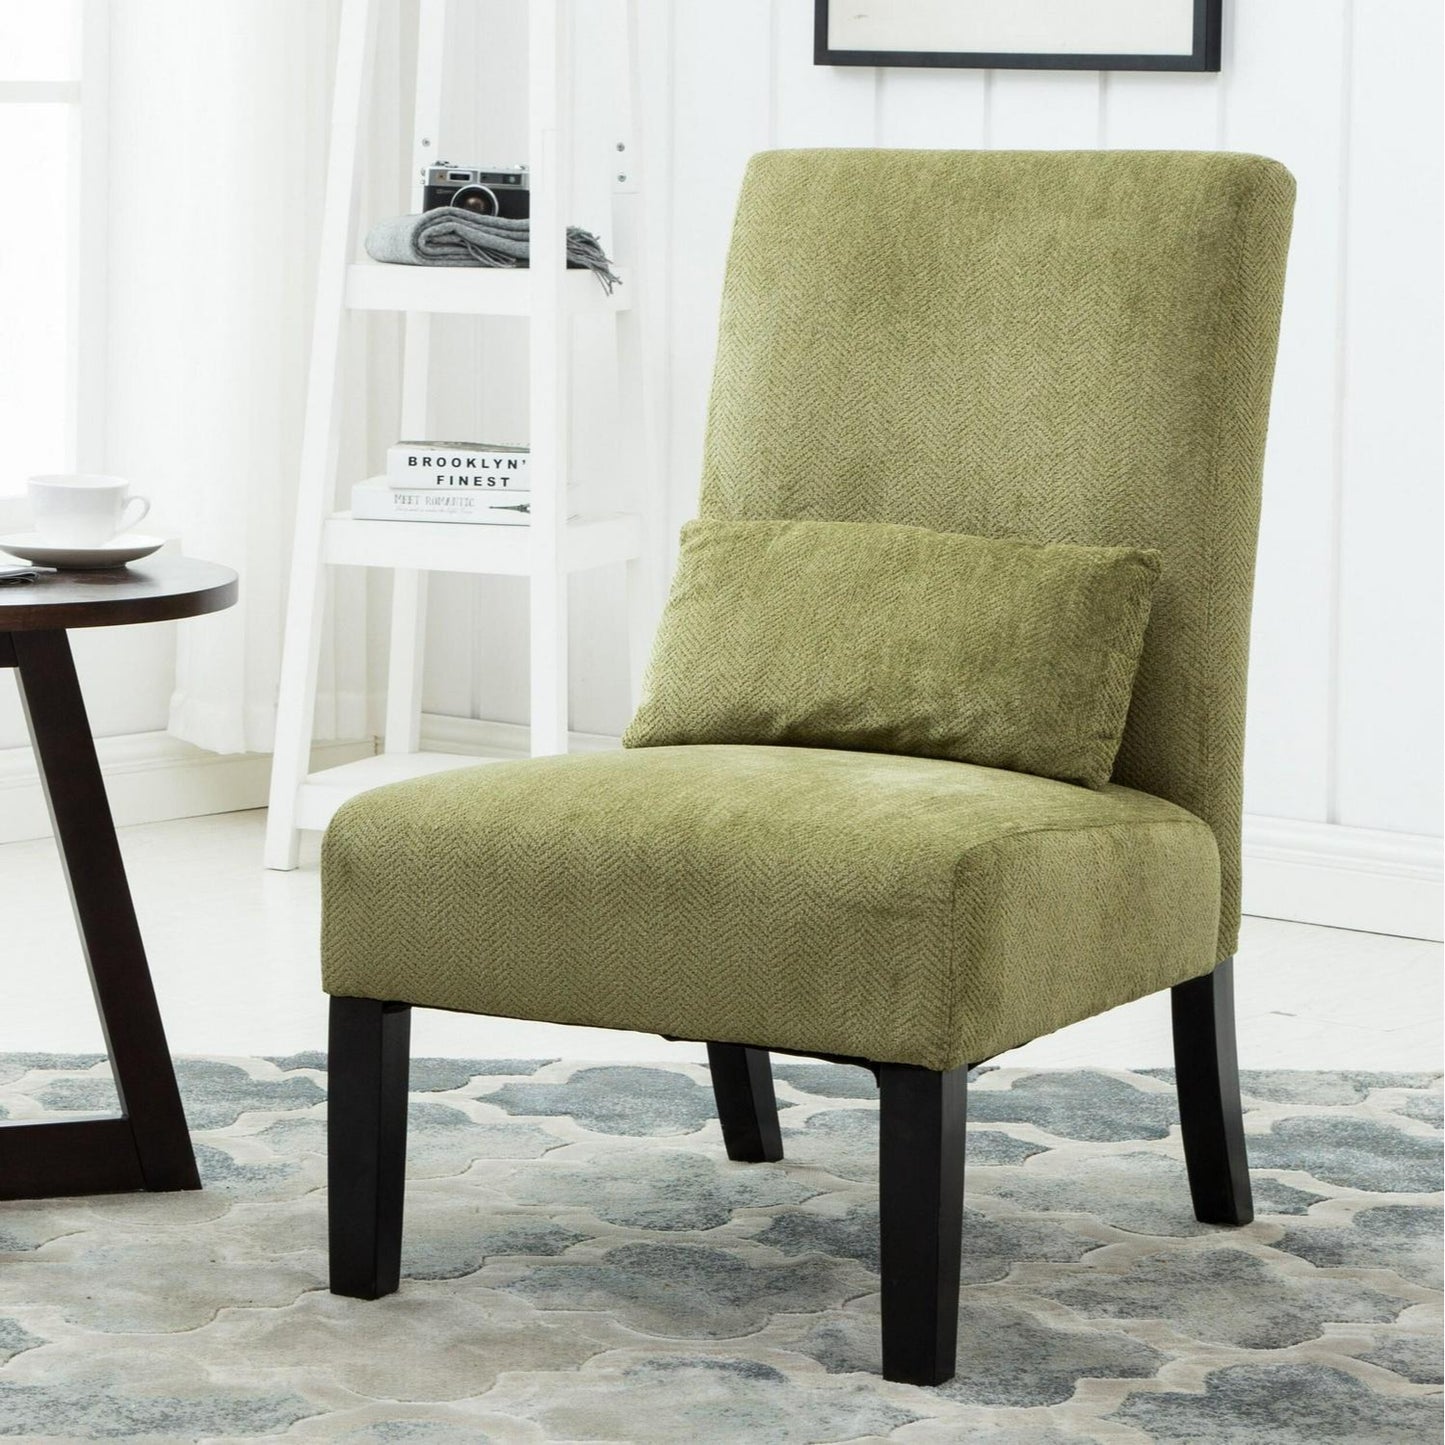 Green Chenille Fabric Accent Chair w/Matching Pillow - Livingroom, Bedroom